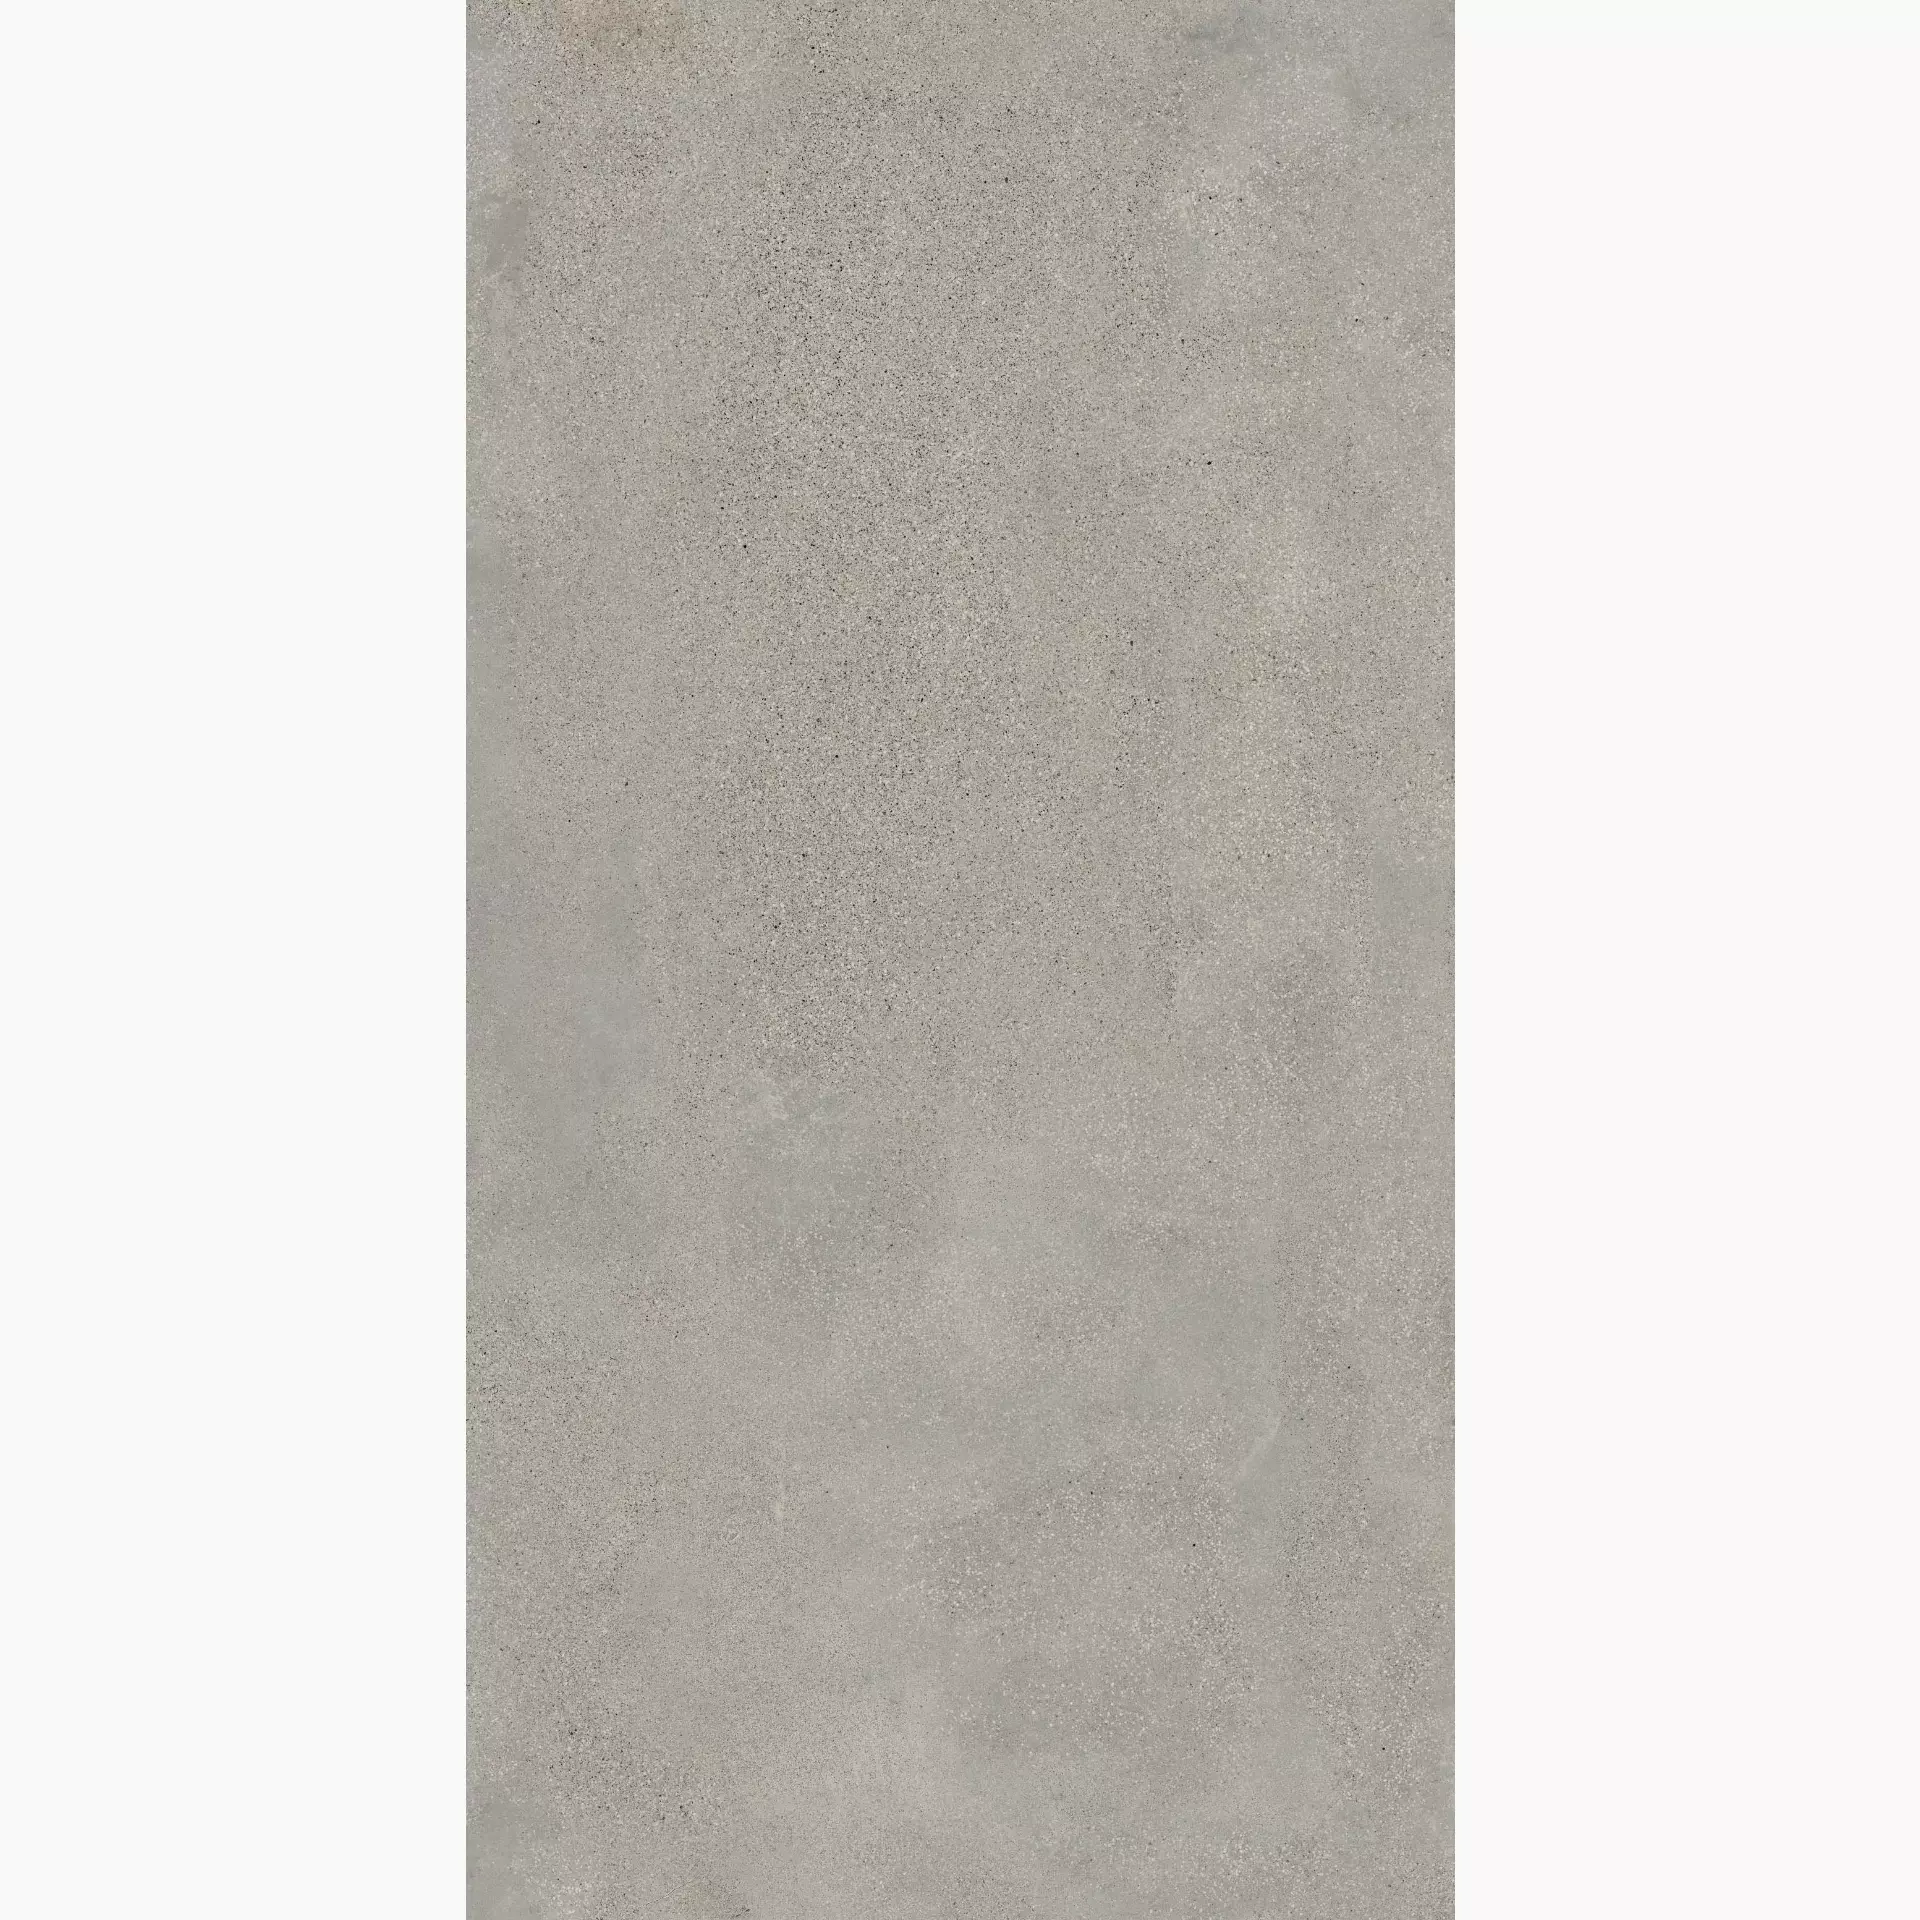 ABK Out.20 Blend Concrete Ash Outdoor PF60007024 60x120cm rectified 20mm